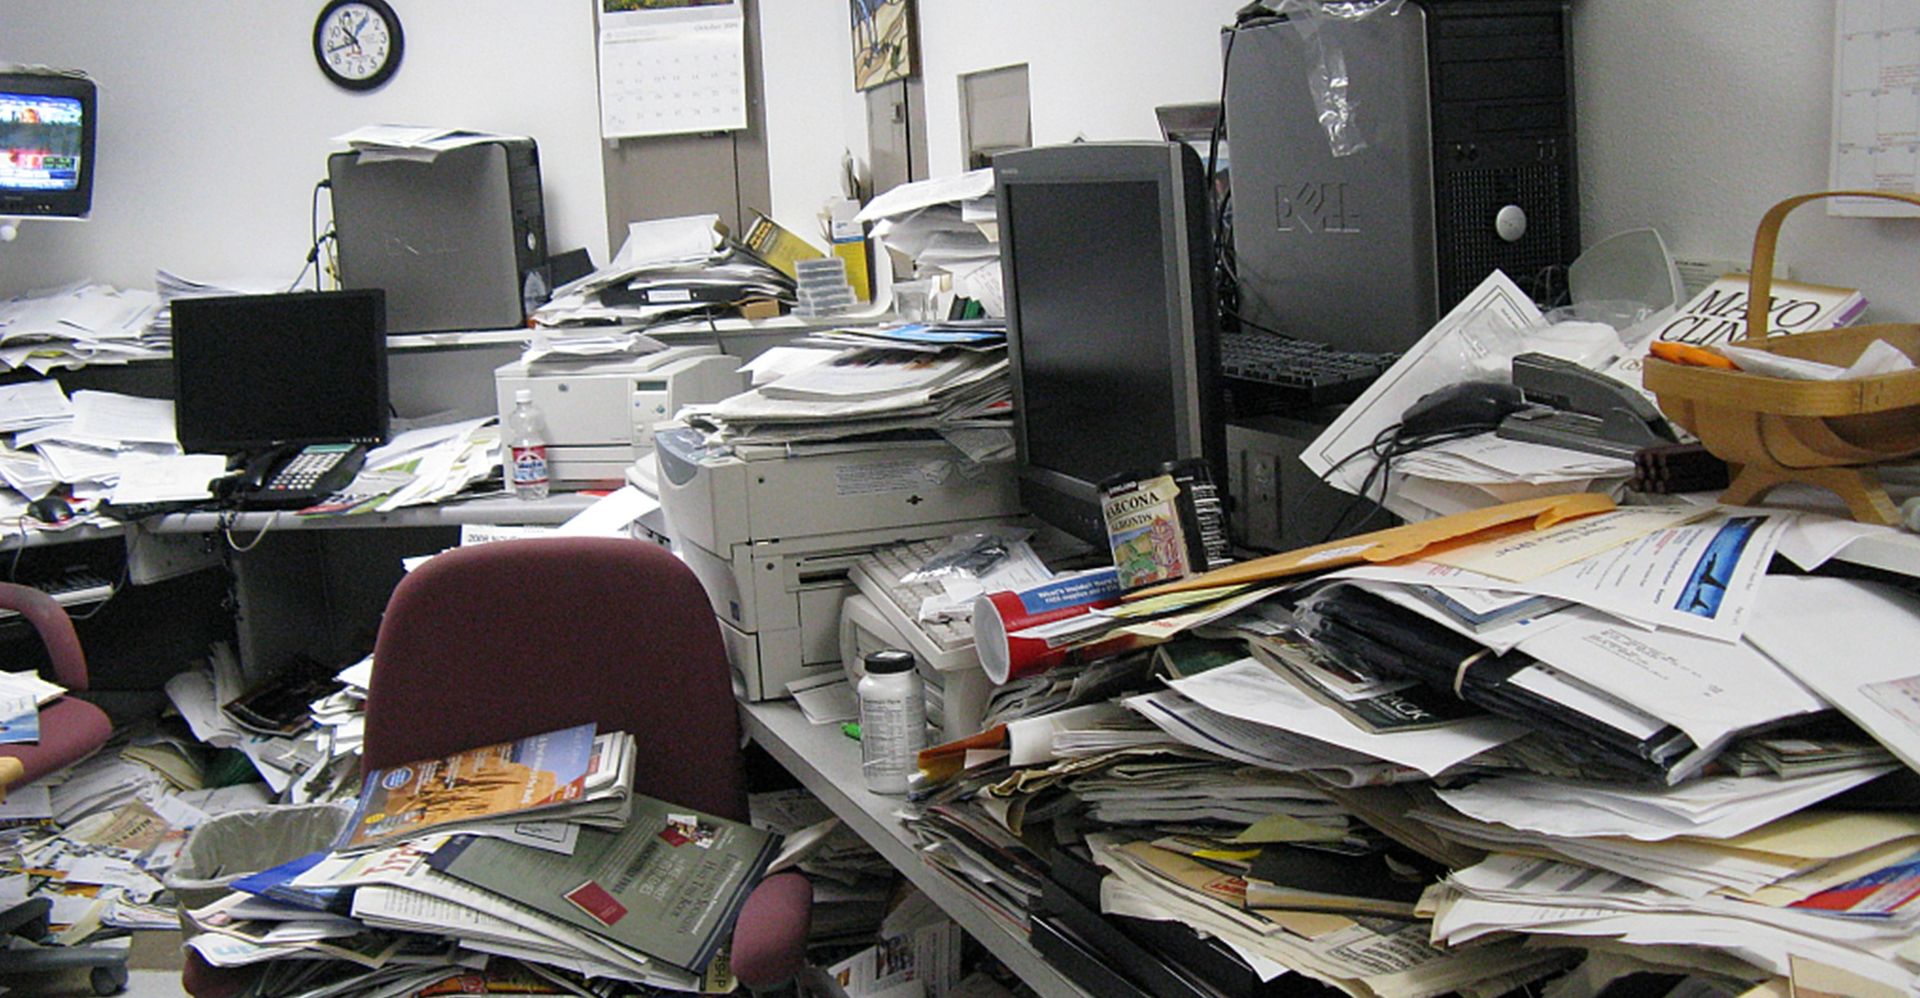 National "Clean your desk" Day 